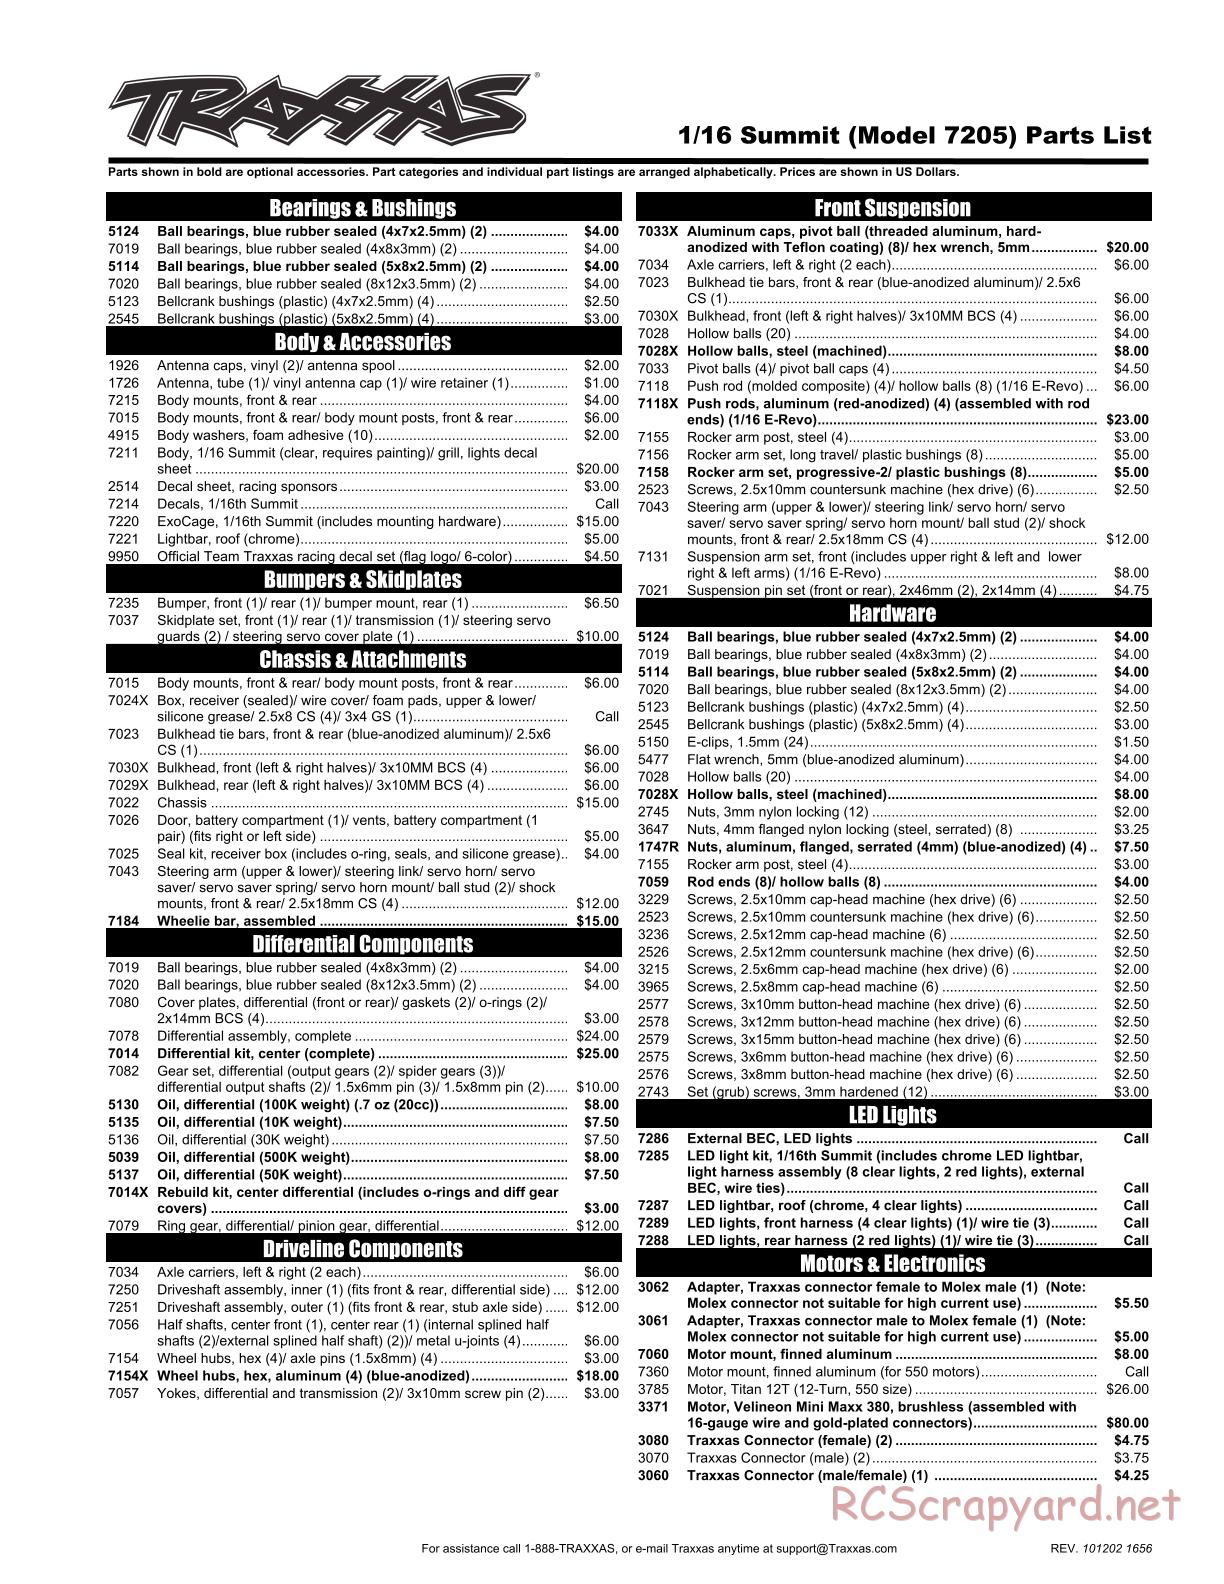 Traxxas - 1/16 Summit (2011) - Parts List - Page 1